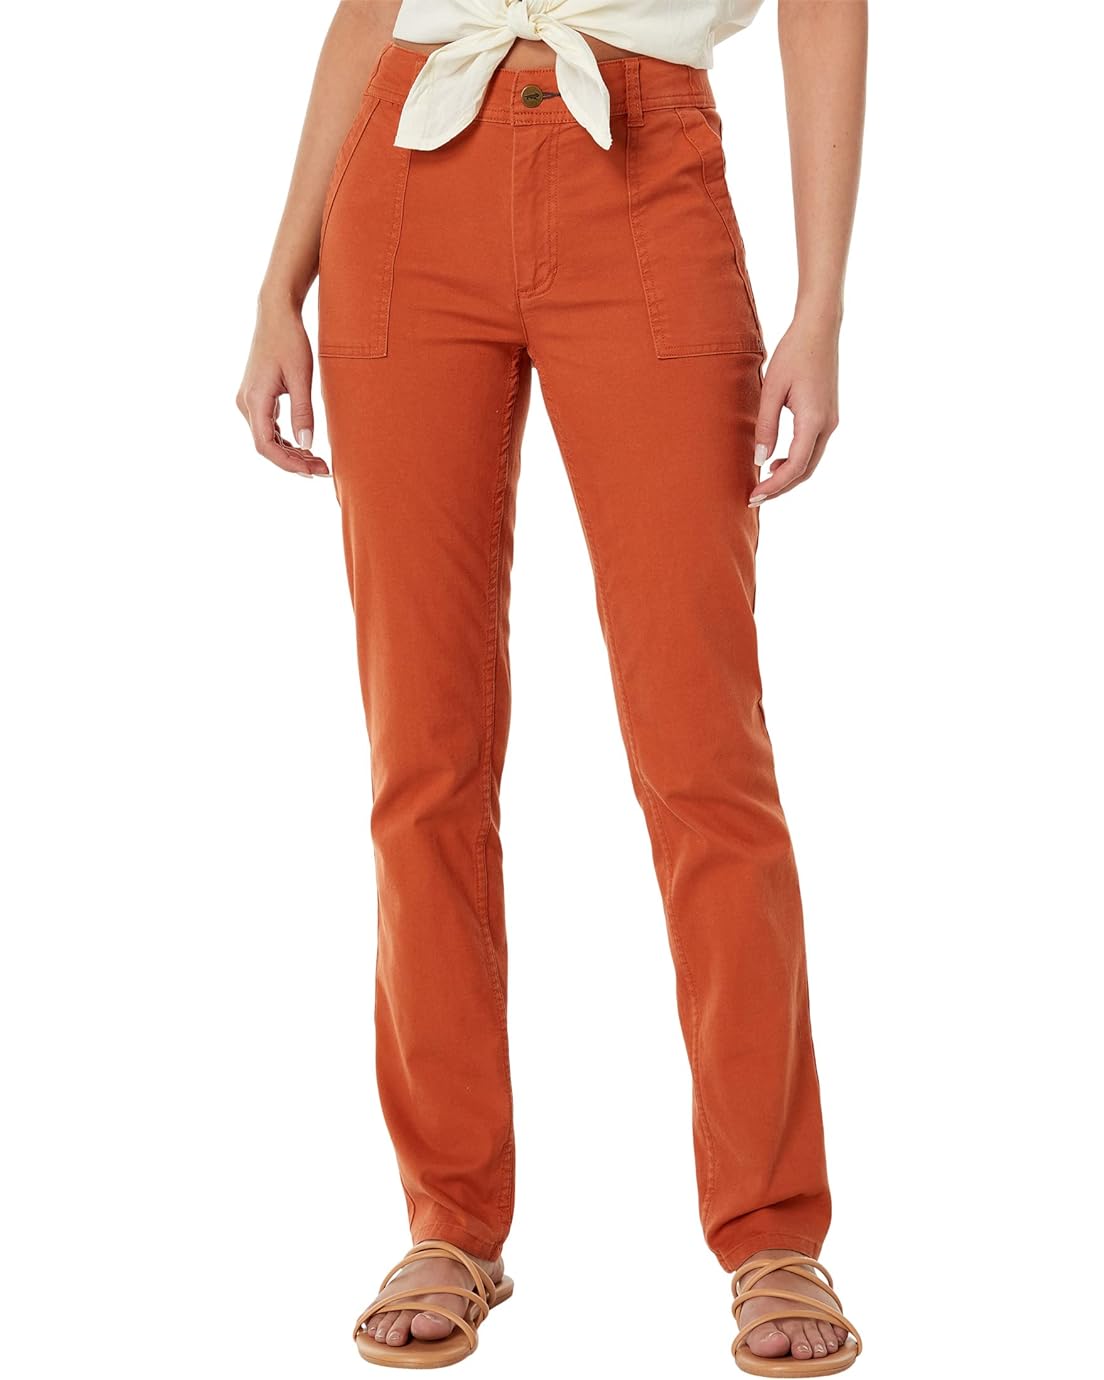 Toad&Co Earthworks Pants